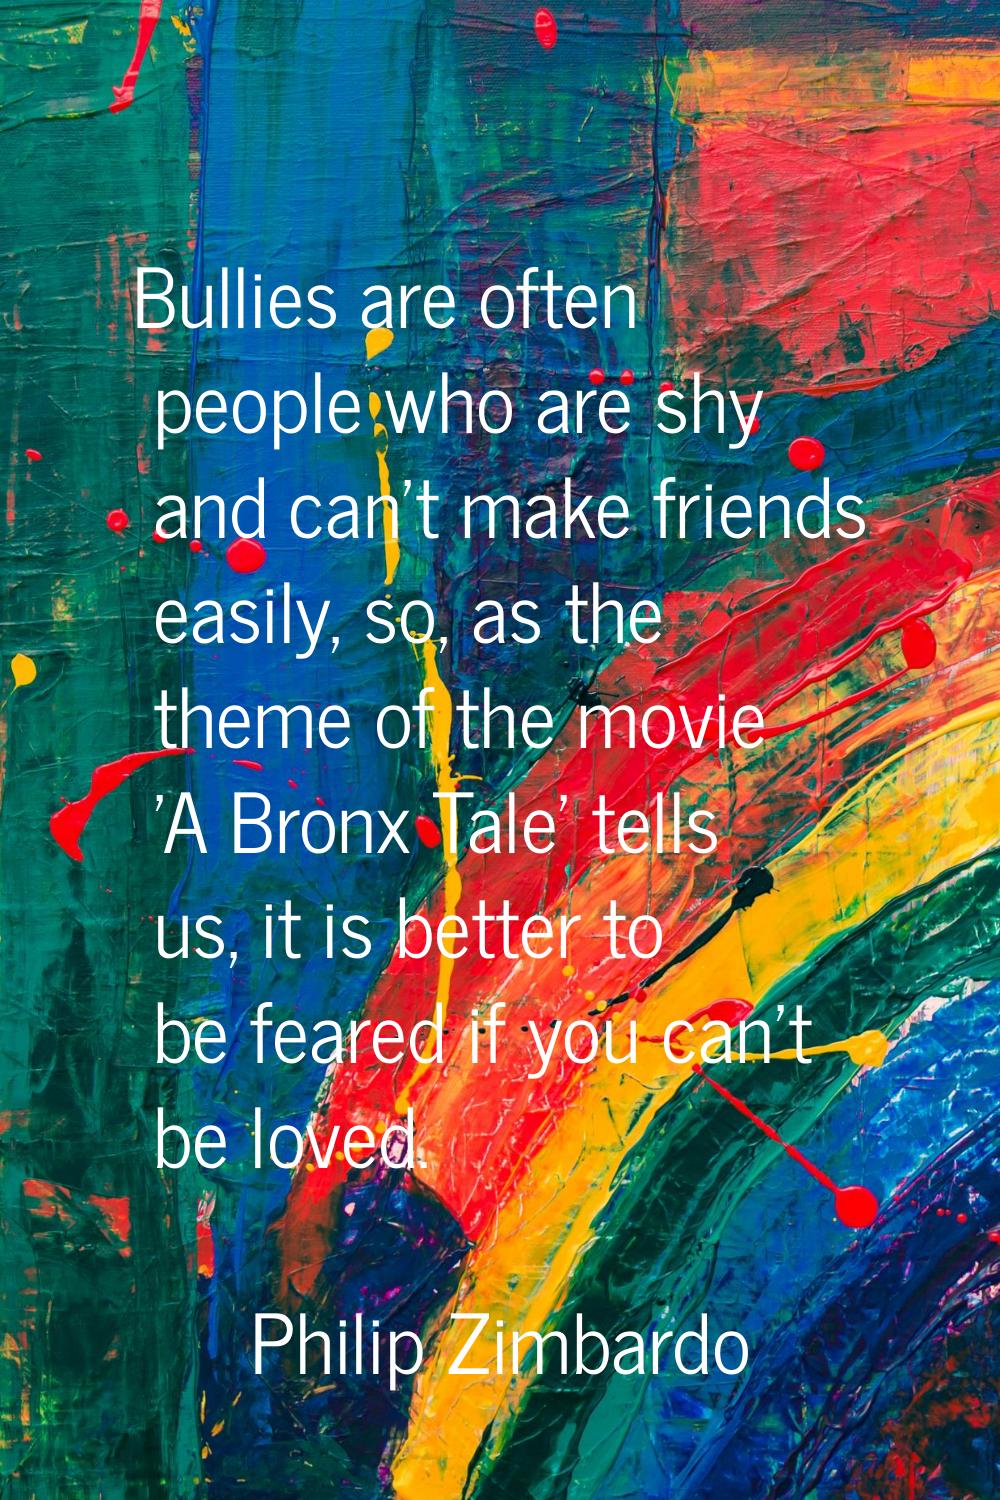 Bullies are often people who are shy and can't make friends easily, so, as the theme of the movie '